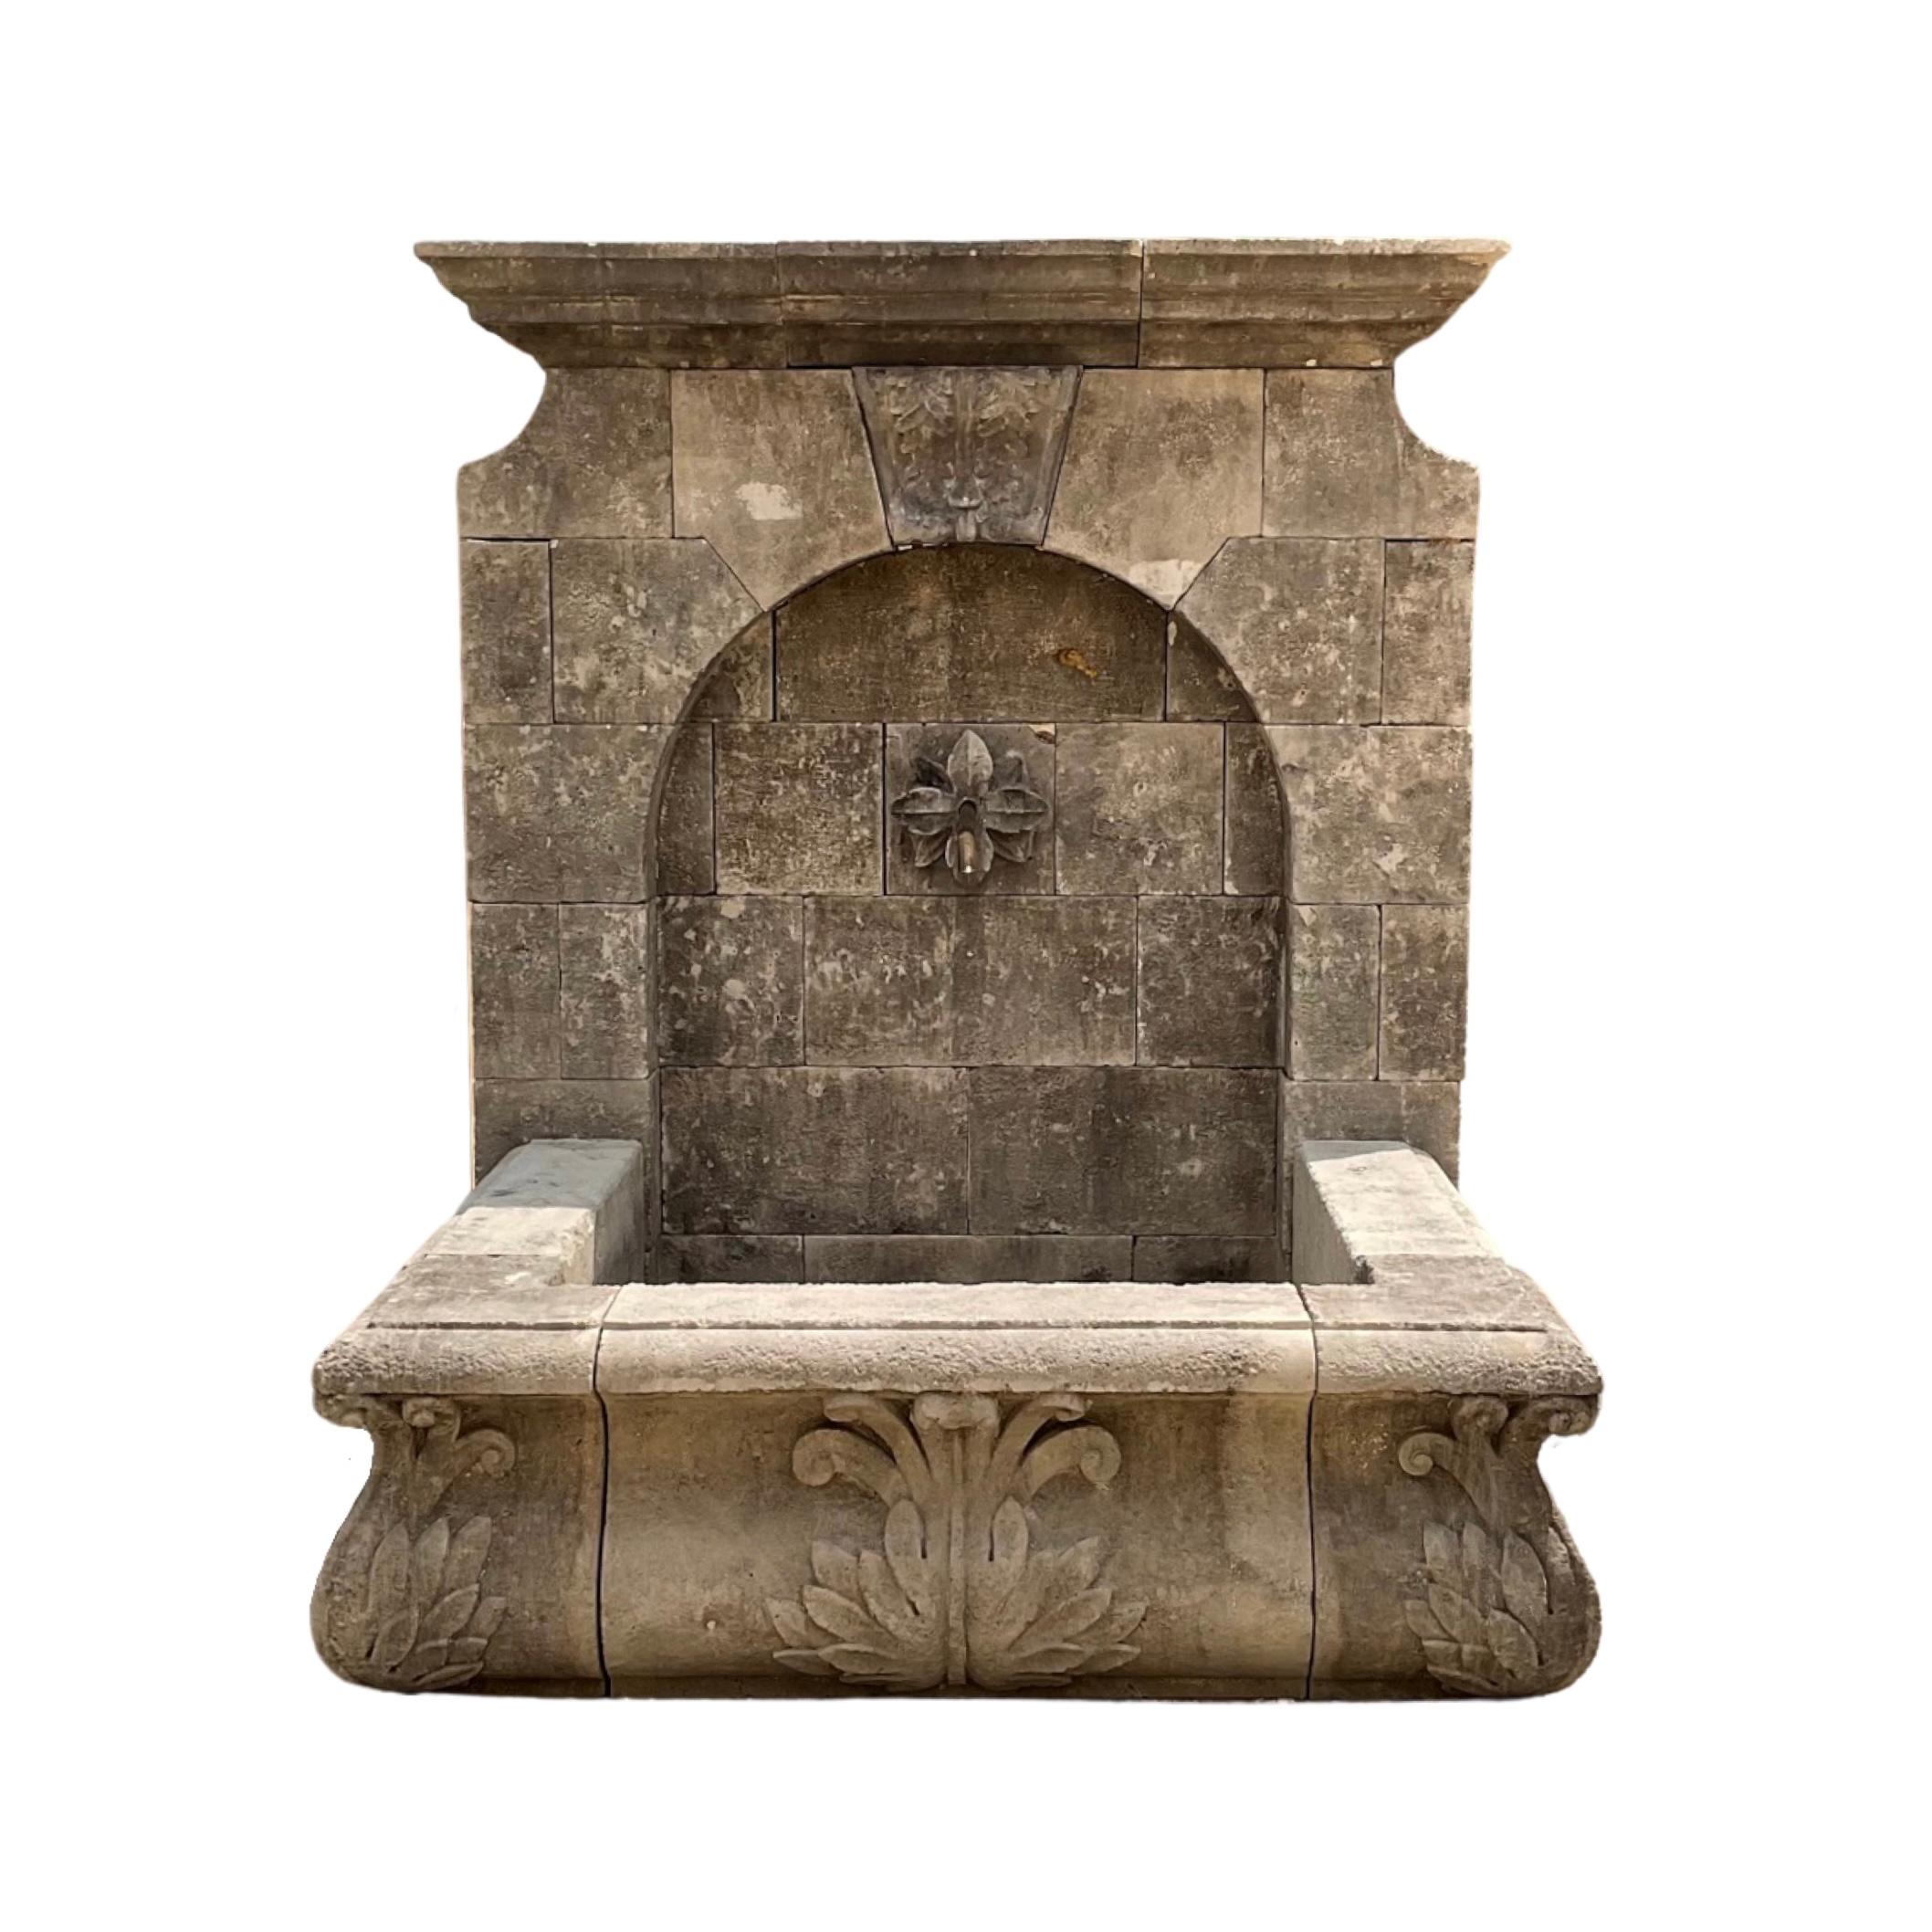 This gorgeous French Limestone Wall Fountain is a perfect addition to any outdoor space. Hand-crafted from sturdy limestone, it showcases a floral and leaf design carved throughout the fountain and bottom basin from the 17th century. Enjoy a